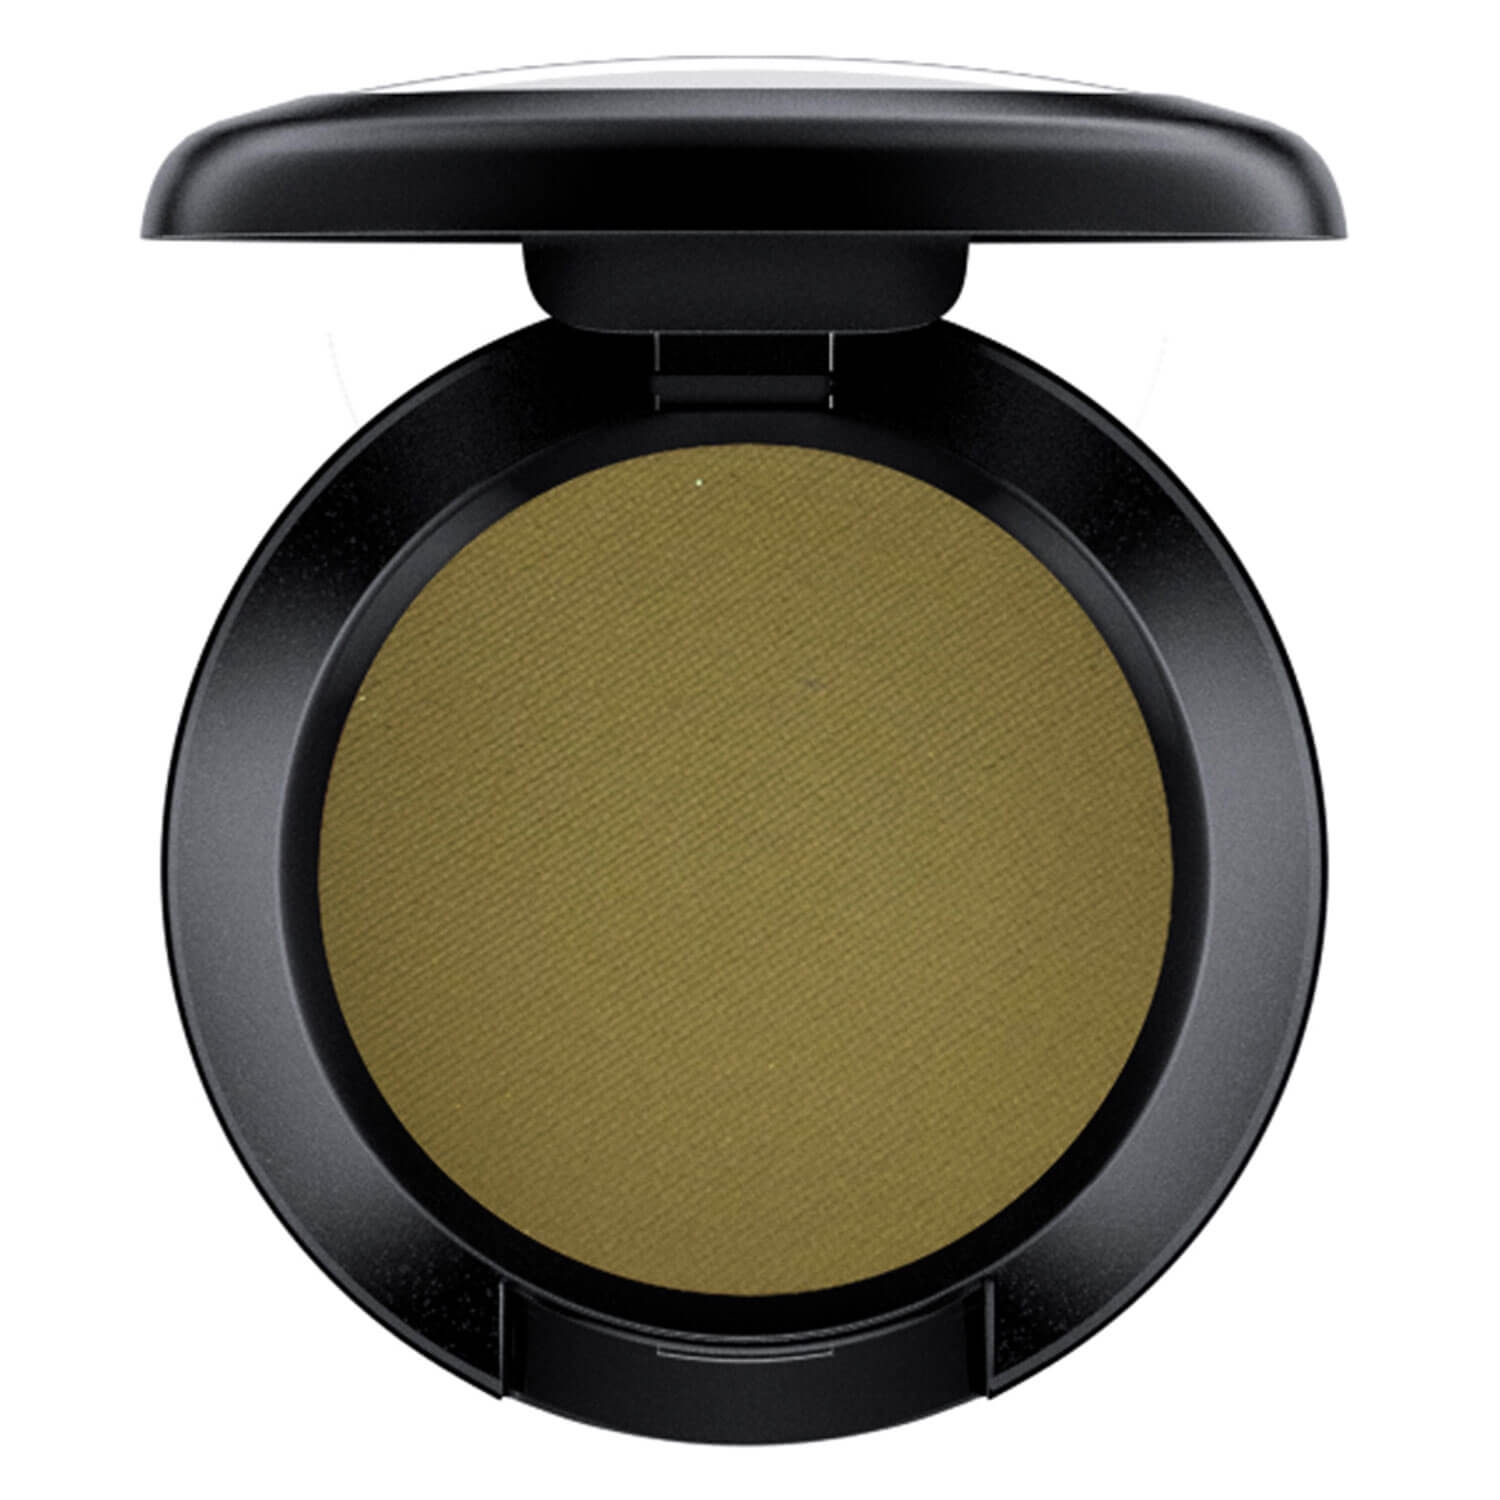 Product image from Visual Arts - Small Eye Shadow Matte Mo'Money, Mo'Problems